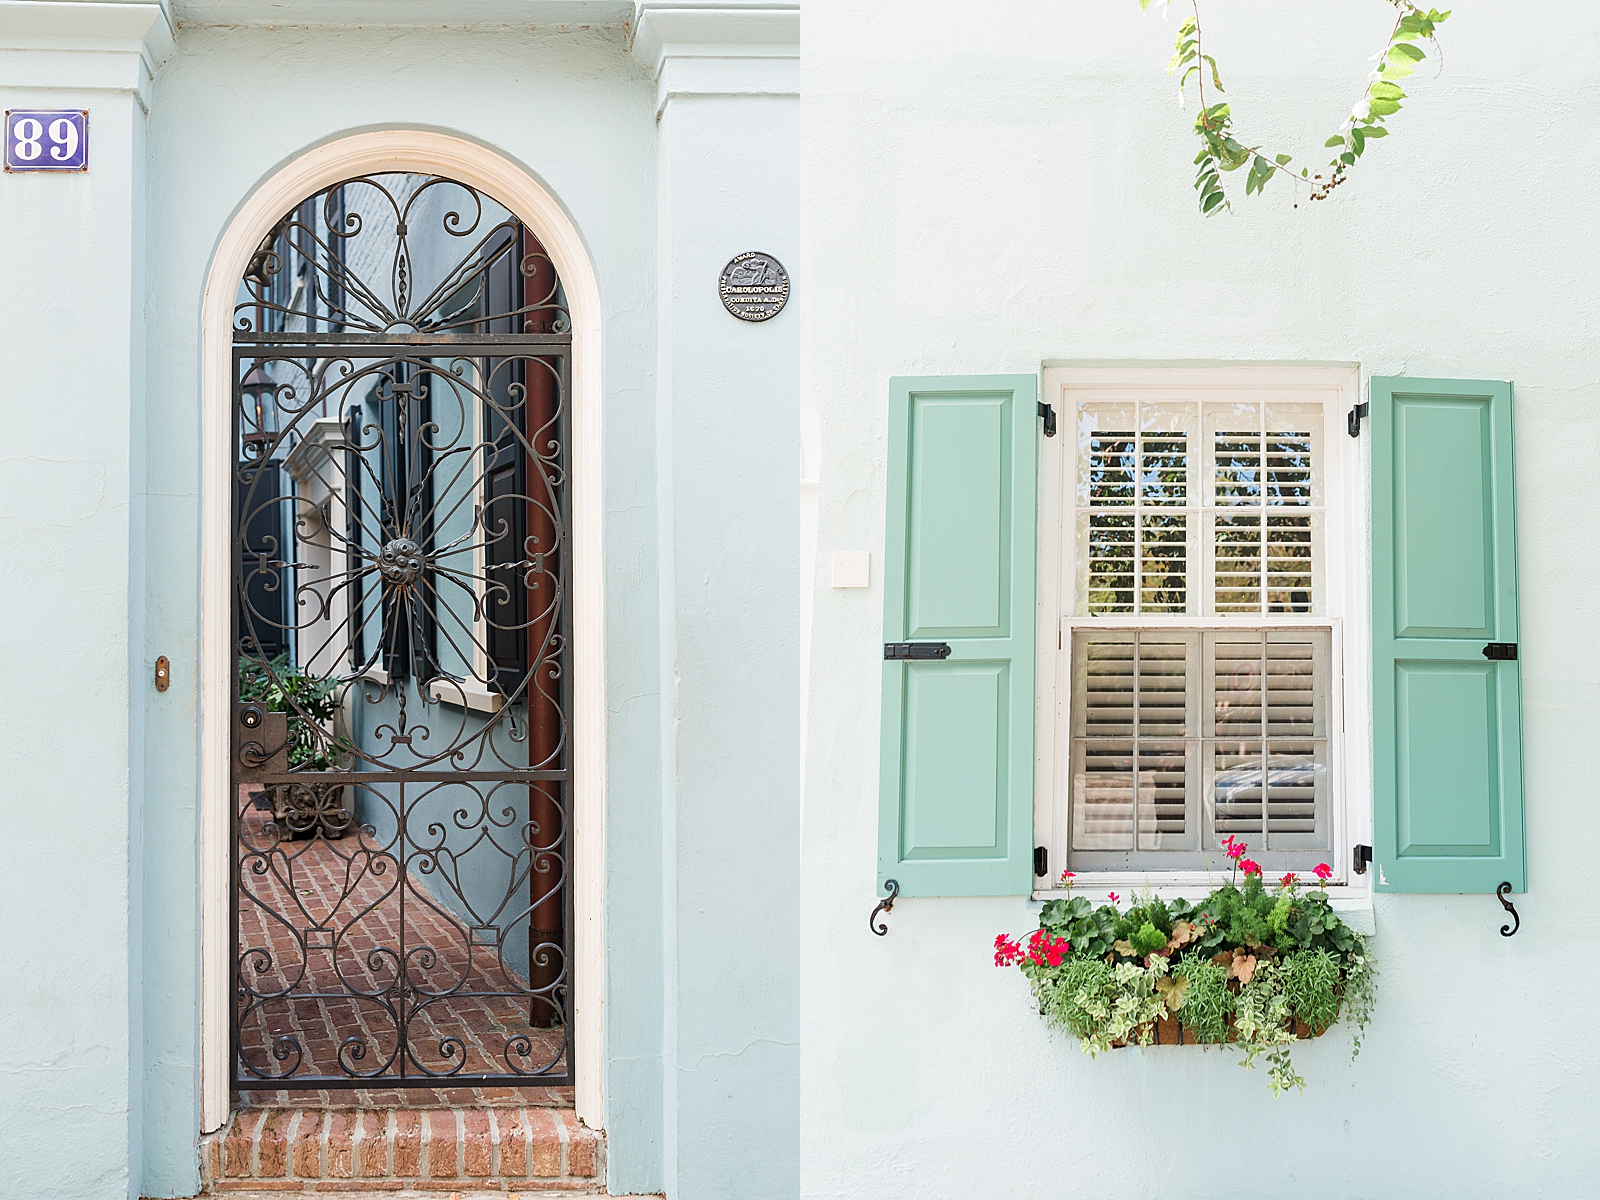 Downtown Charleston Rainbow Row Iron Gated Doorway and Green Window with shutters photos